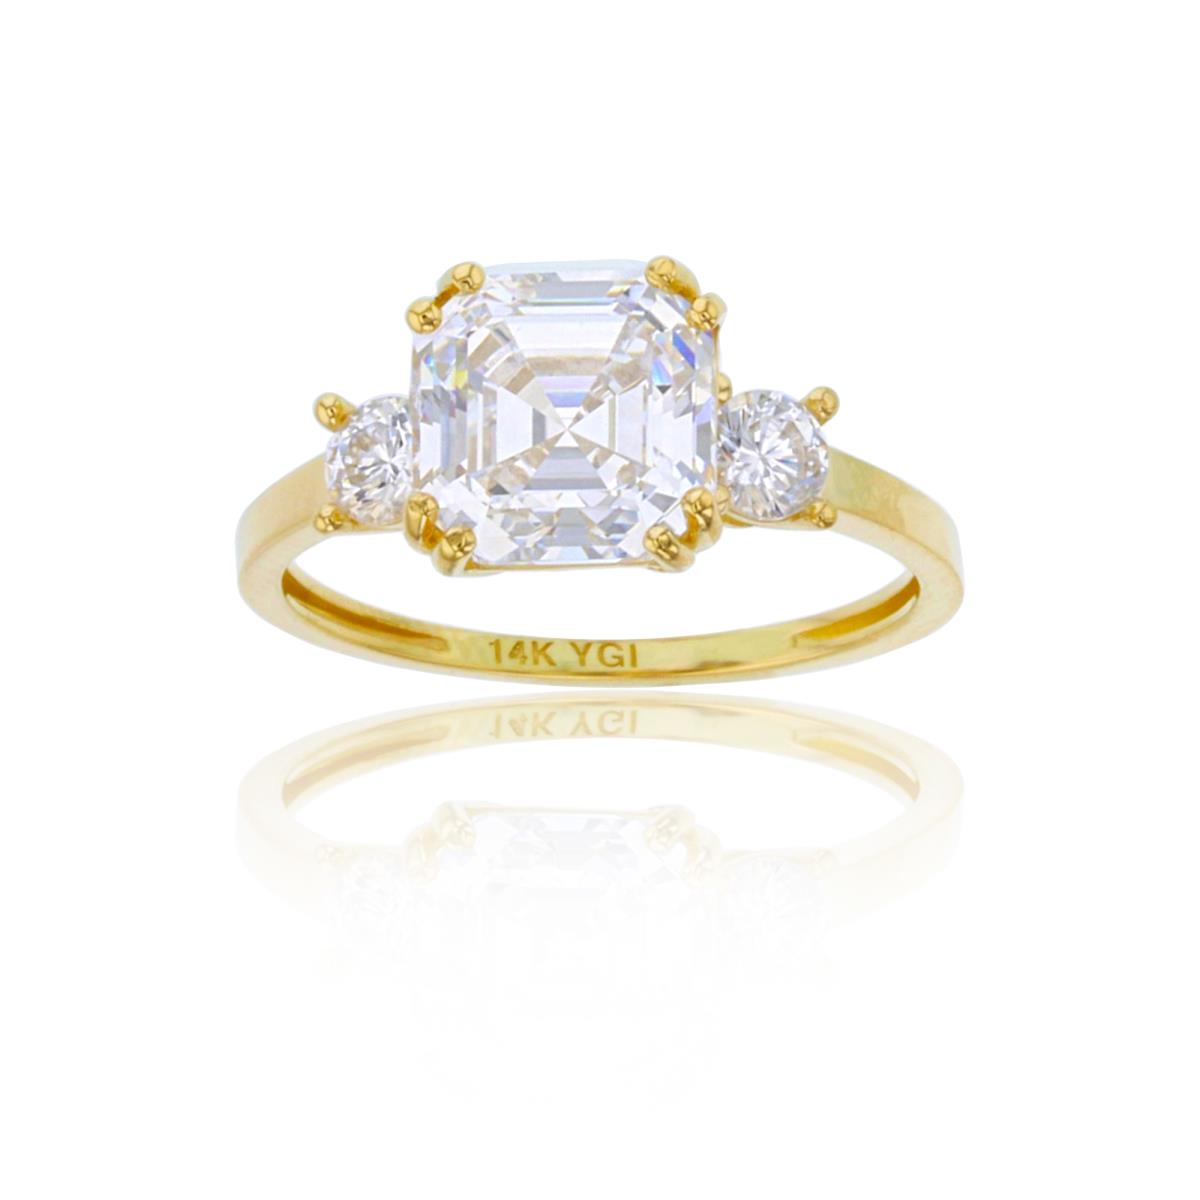 14K Yellow Gold 8mm Cush & 3.5mm Rnd White CZ Solitaire Ring